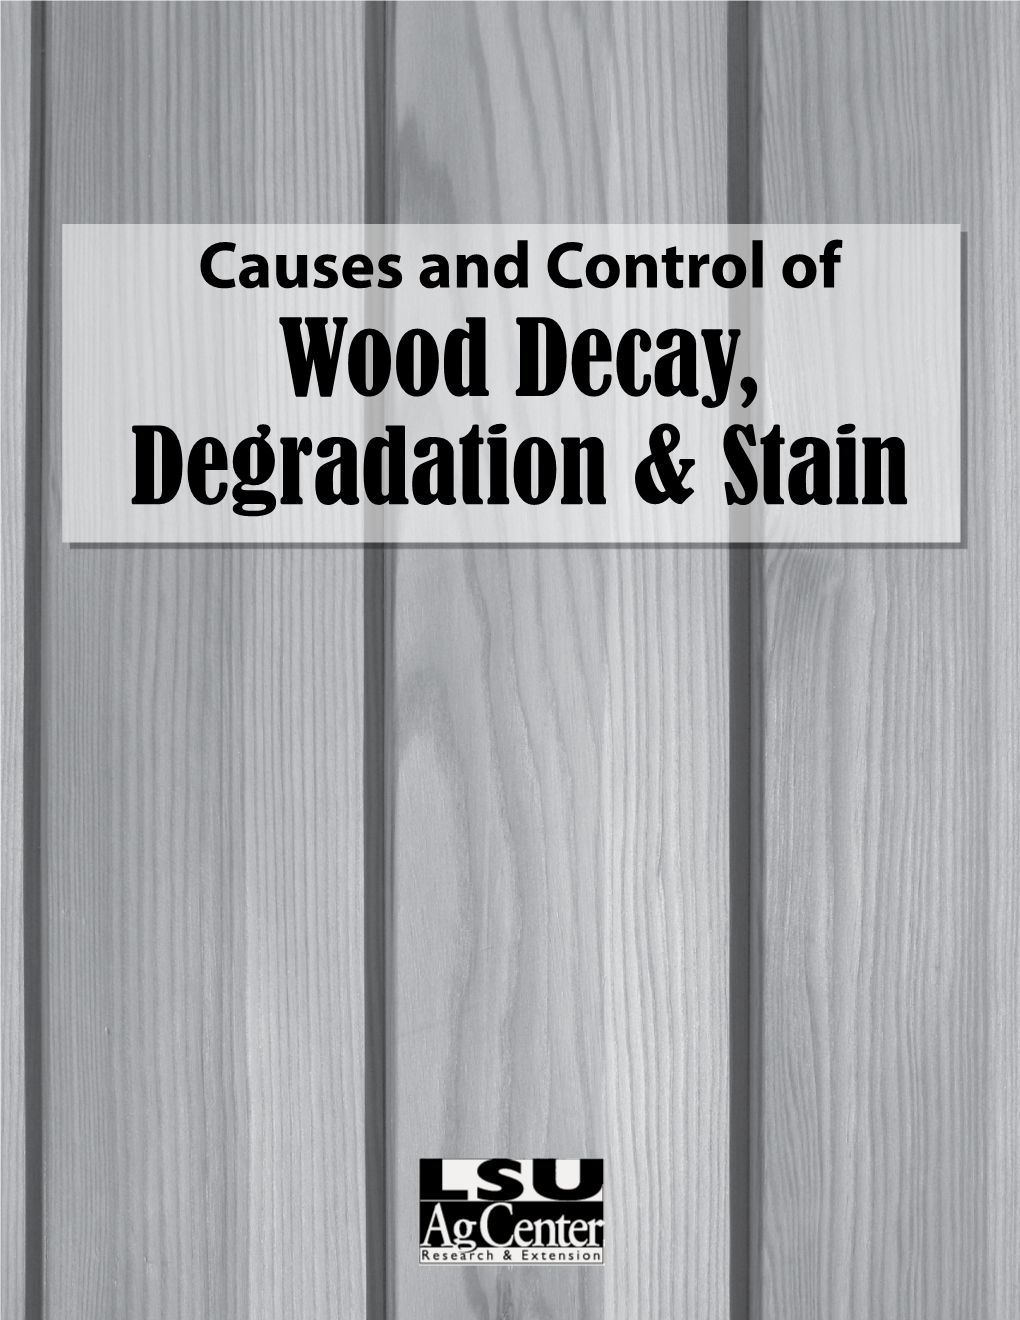 Wood Decay, Degradation & Stain